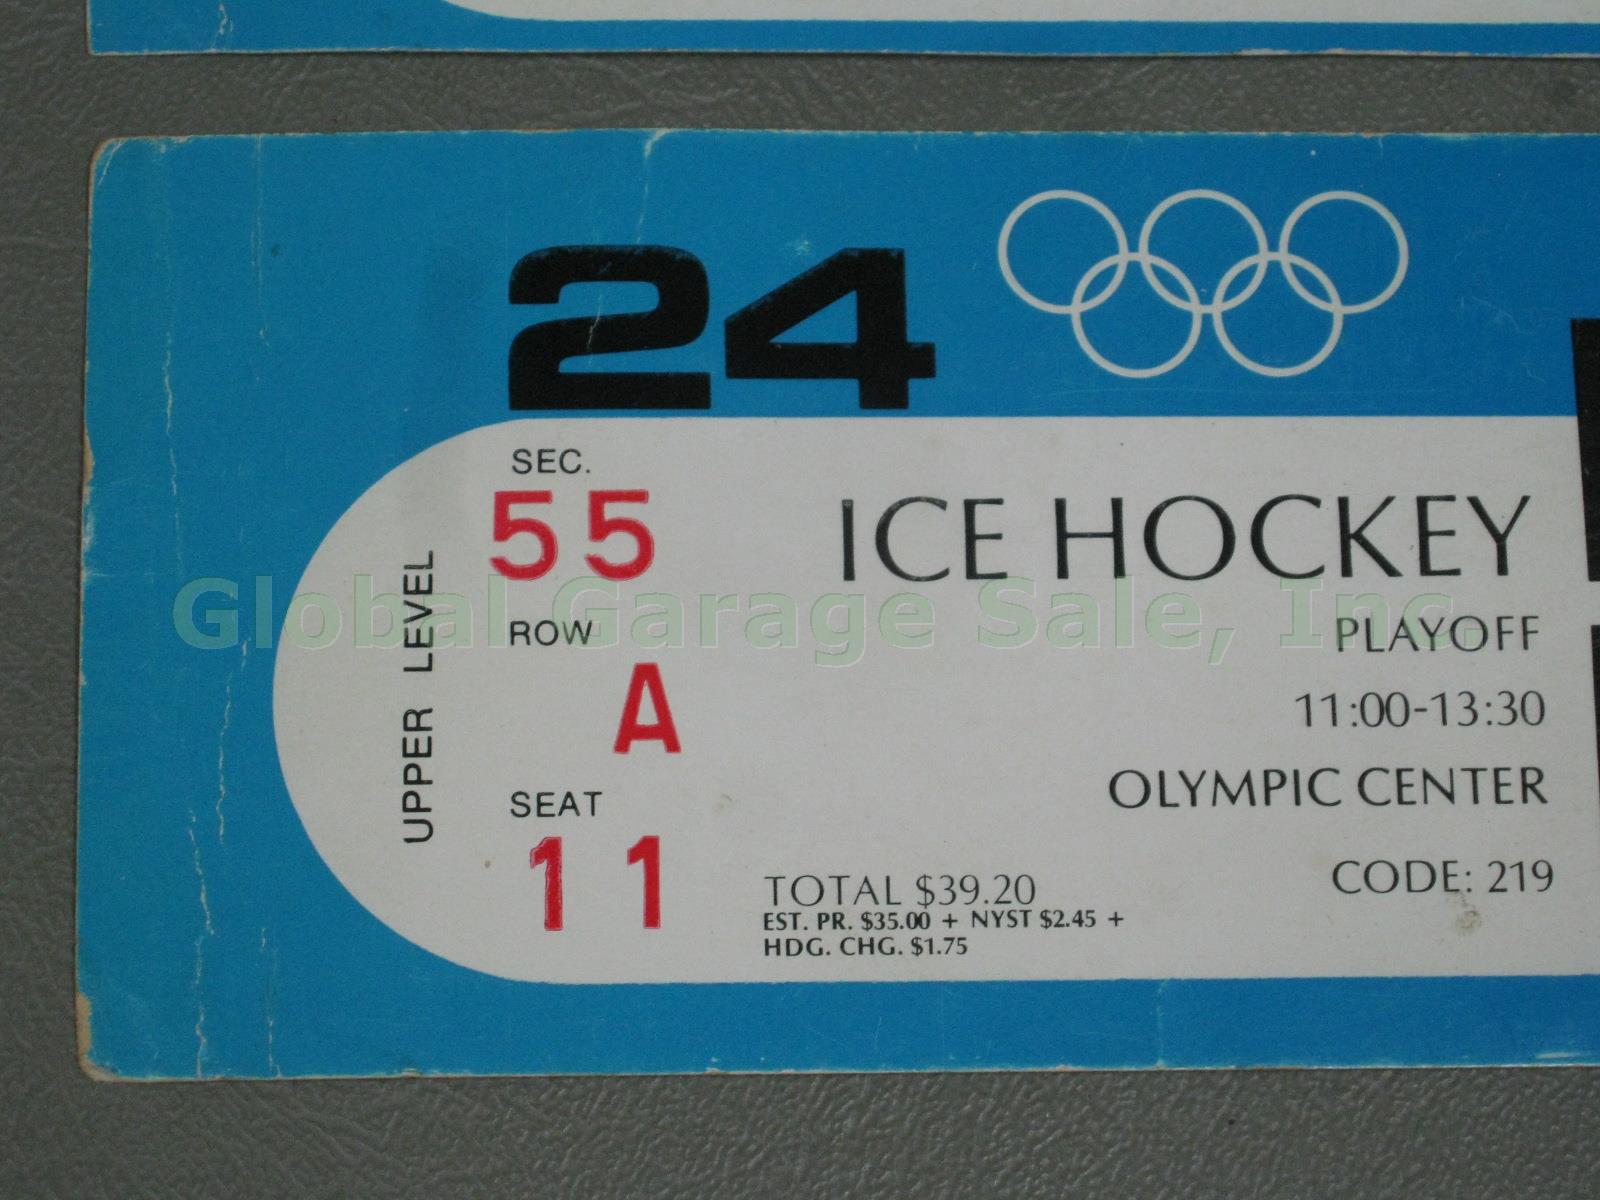 2 Original Tickets 1980 Lake Placid Olympic Games Gold Medal Ice Hockey Game NR! 1